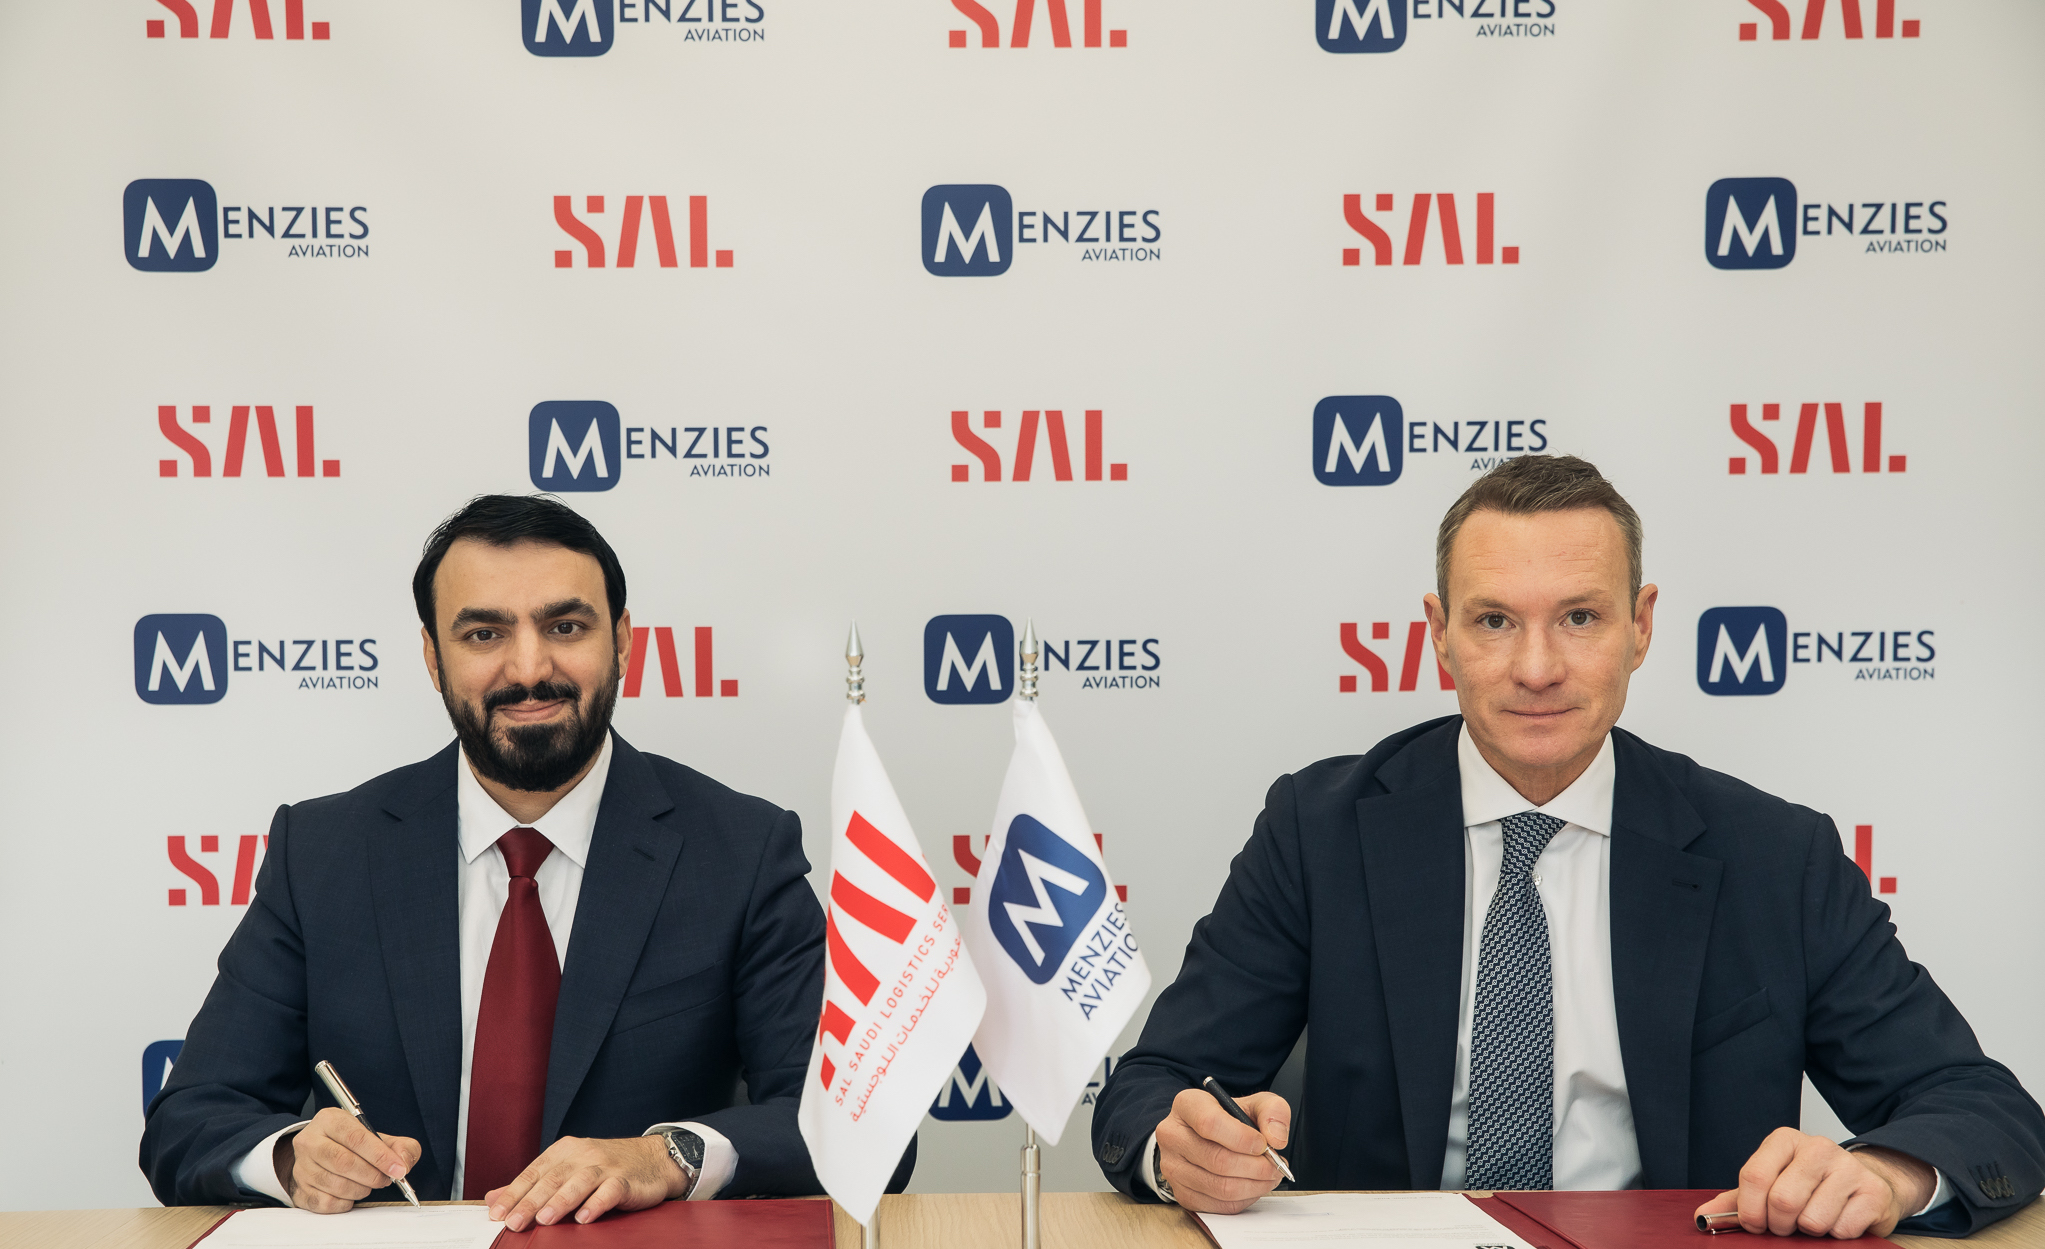 SAL Saudi Logistics Services and Menzies Aviation sign MoU to collaboratively deliver world-class passenger handling services for Low-cost carriers at Saudi airports